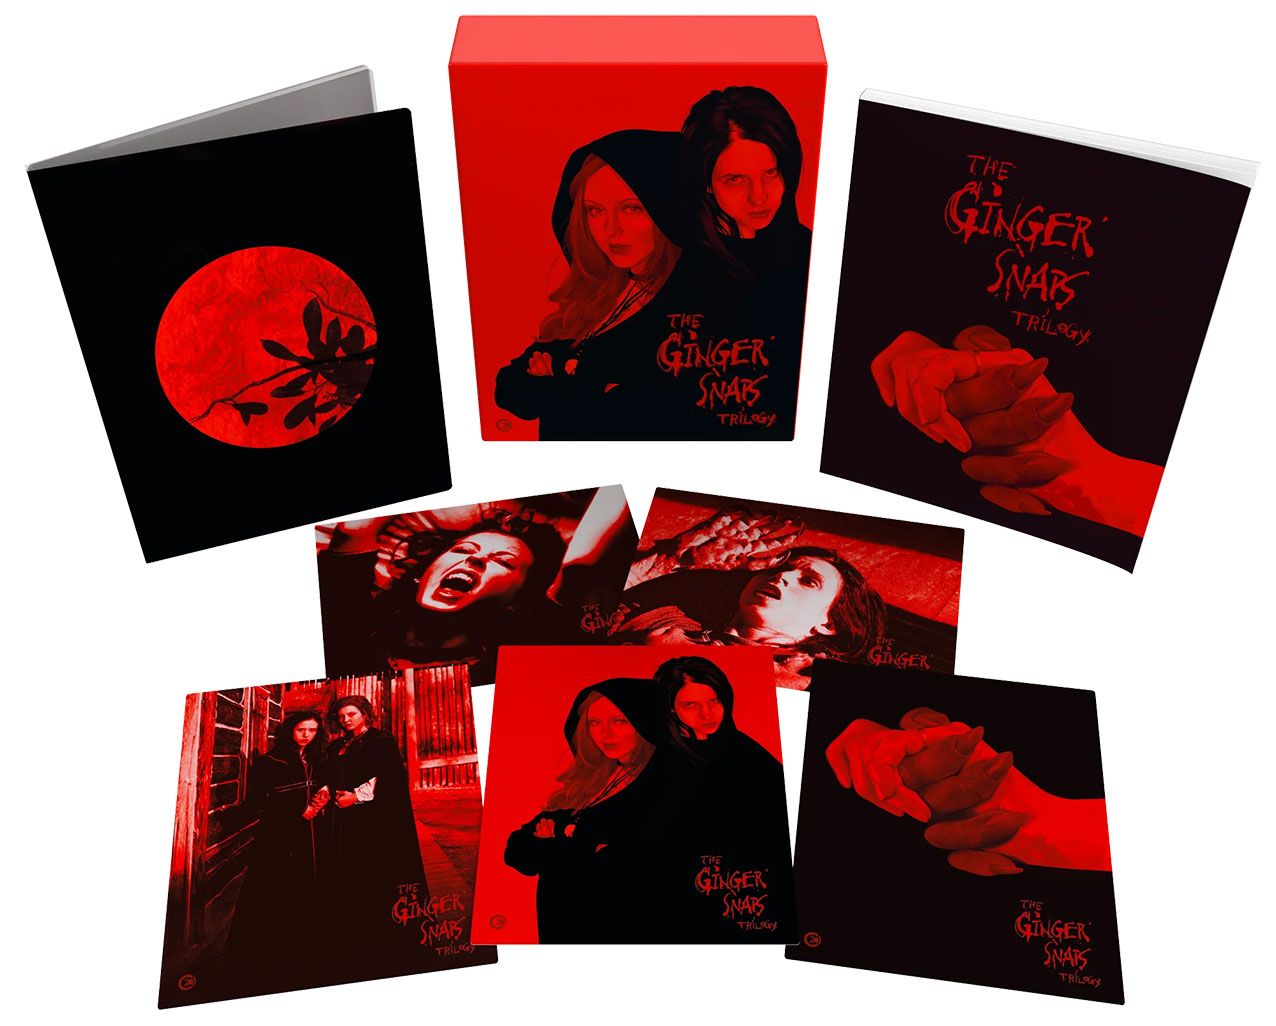 The Ginger Snaps Trilogy Limited Edition Blu-ray pack shot